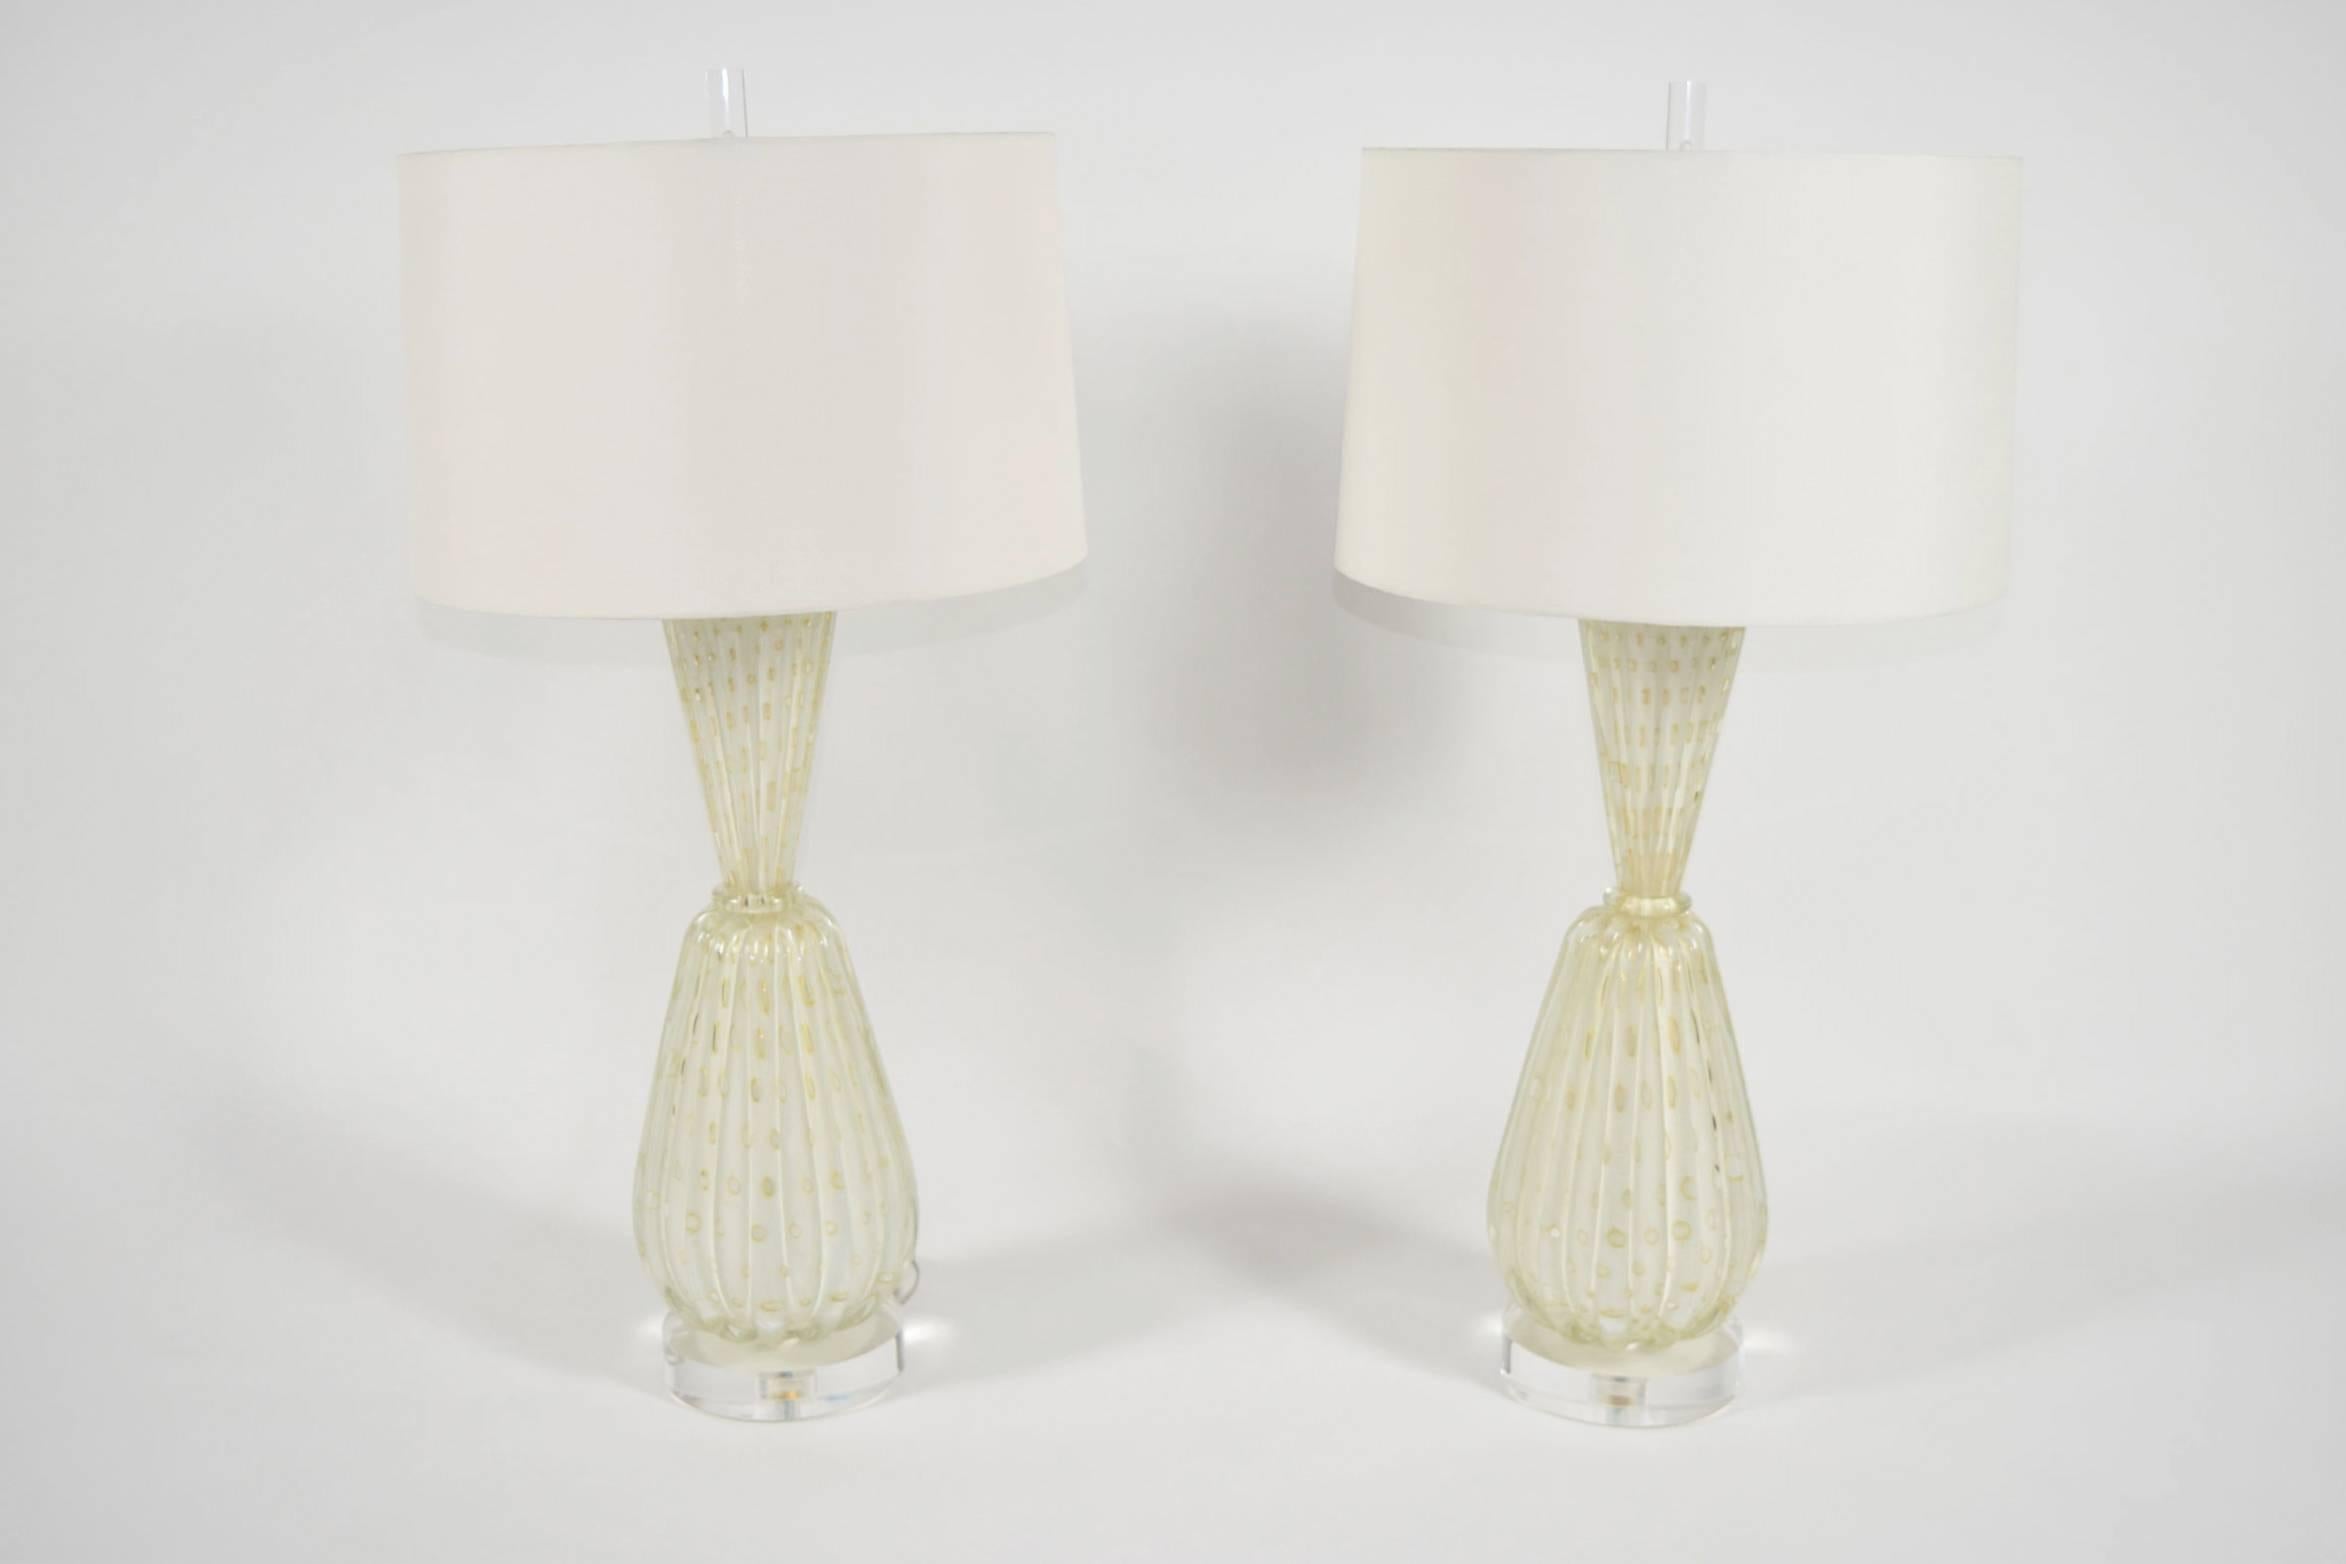 Beautiful pair of large Barovier & Toso Murano lamps. Glass is clear with gold flecking. Lamps have been restored with lucite bases and finials added. Newly rewired. 